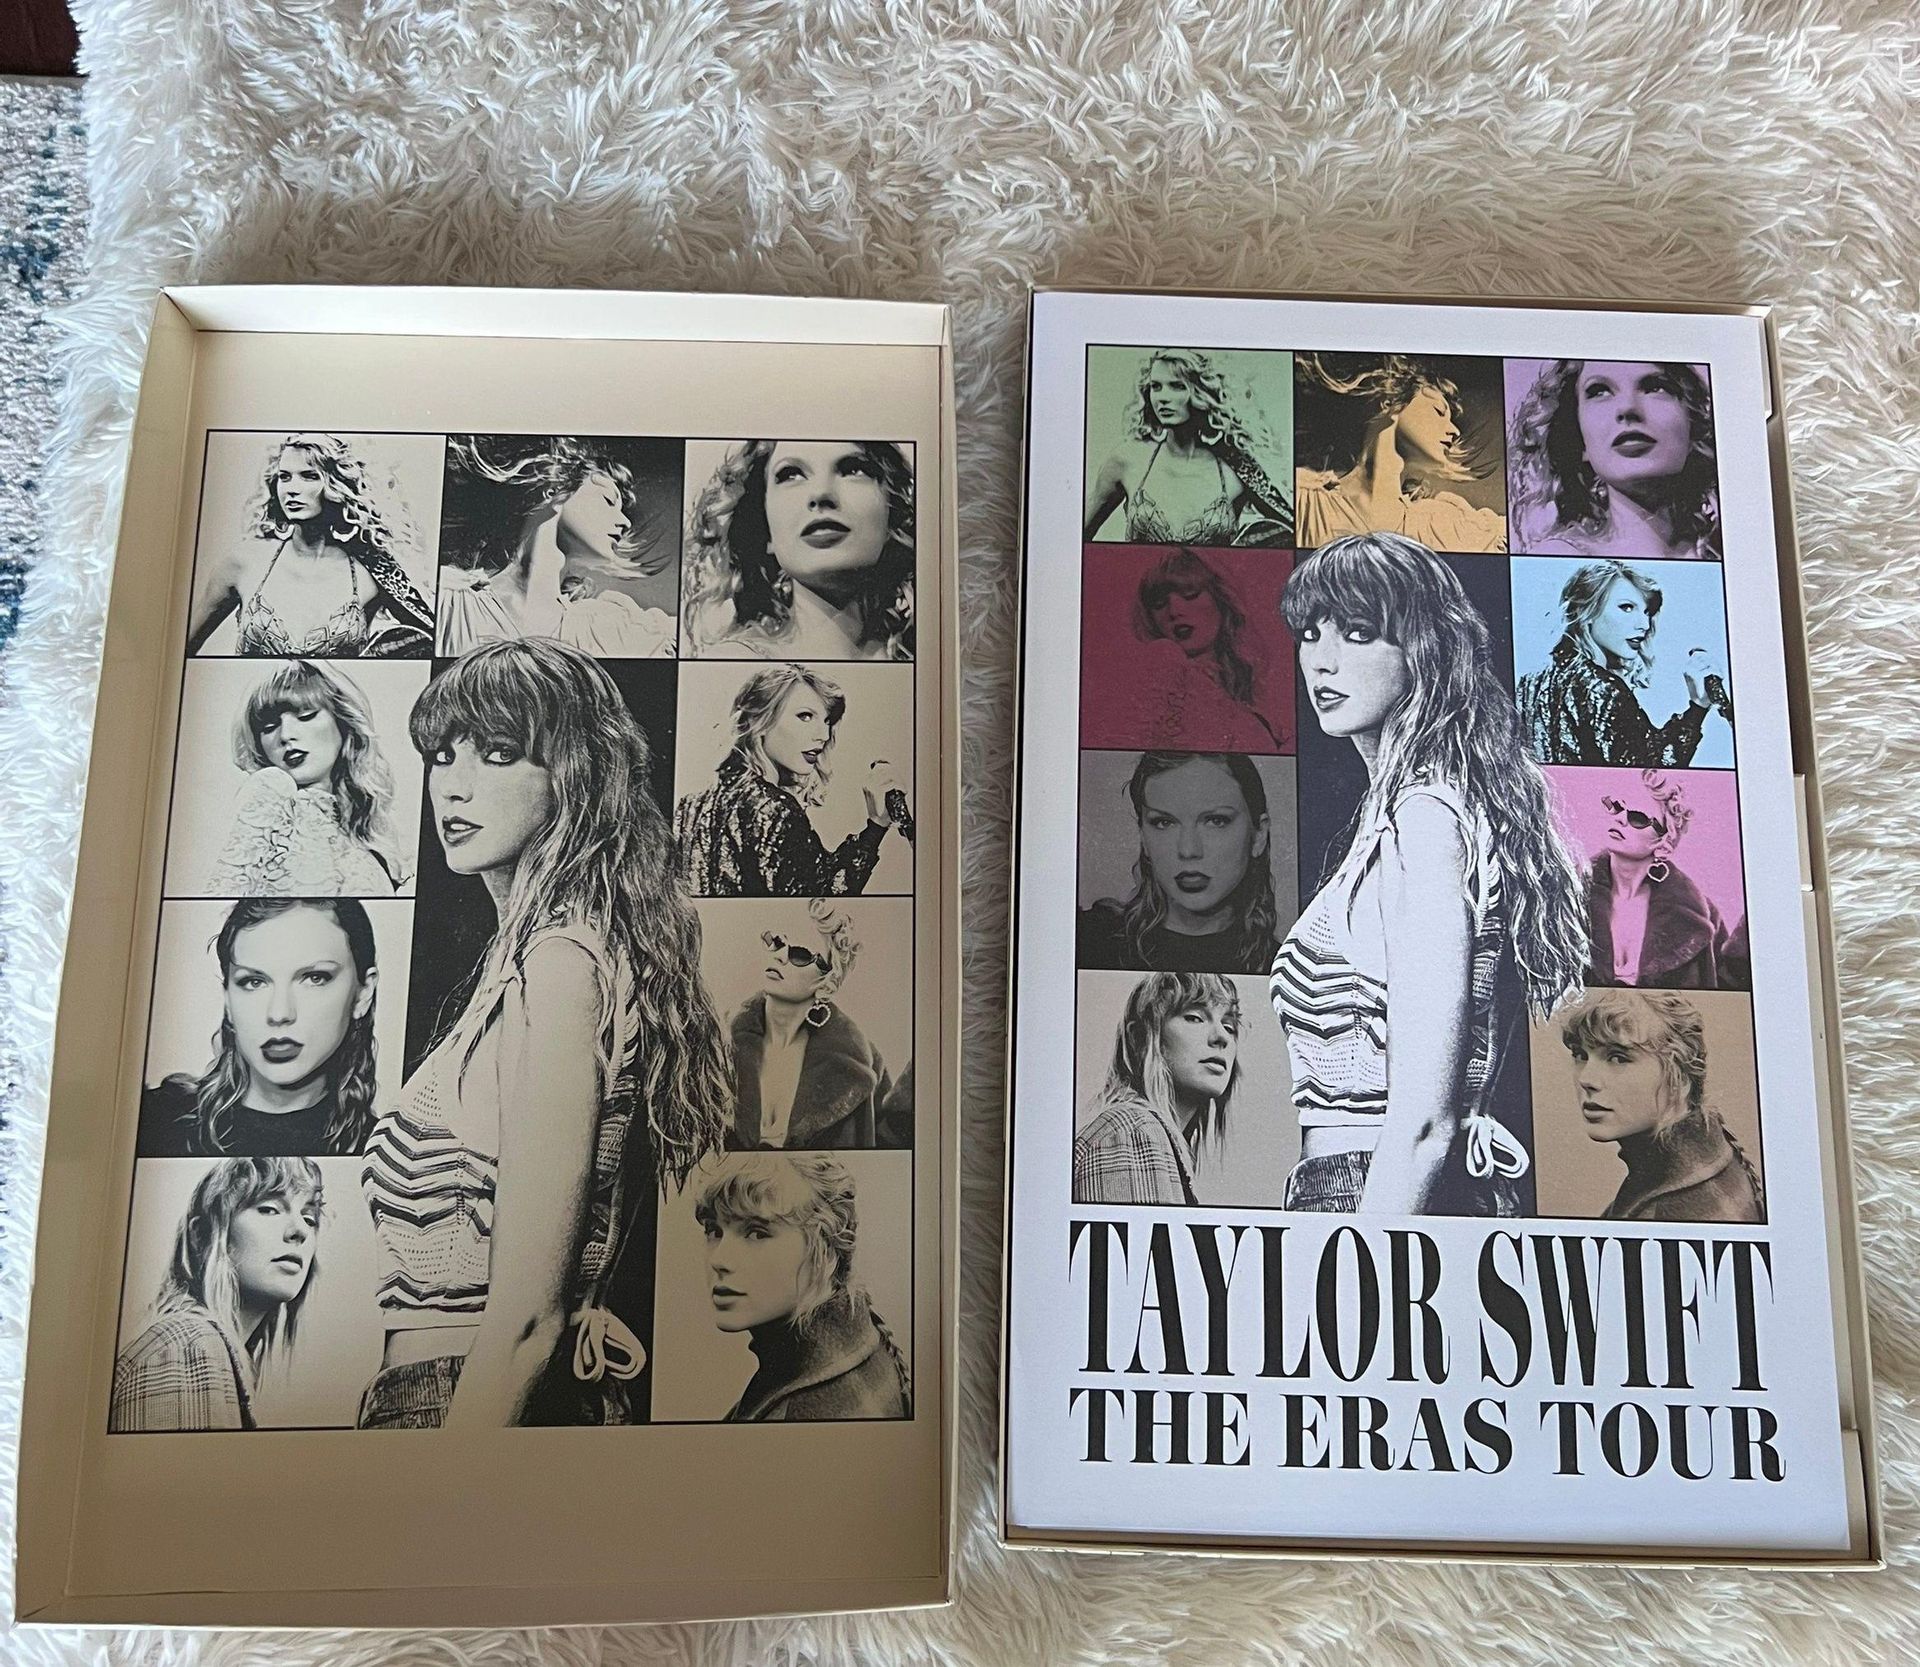 Taylor Swift Eras Tour VIP BOX (ticket not included) - $124 - From 